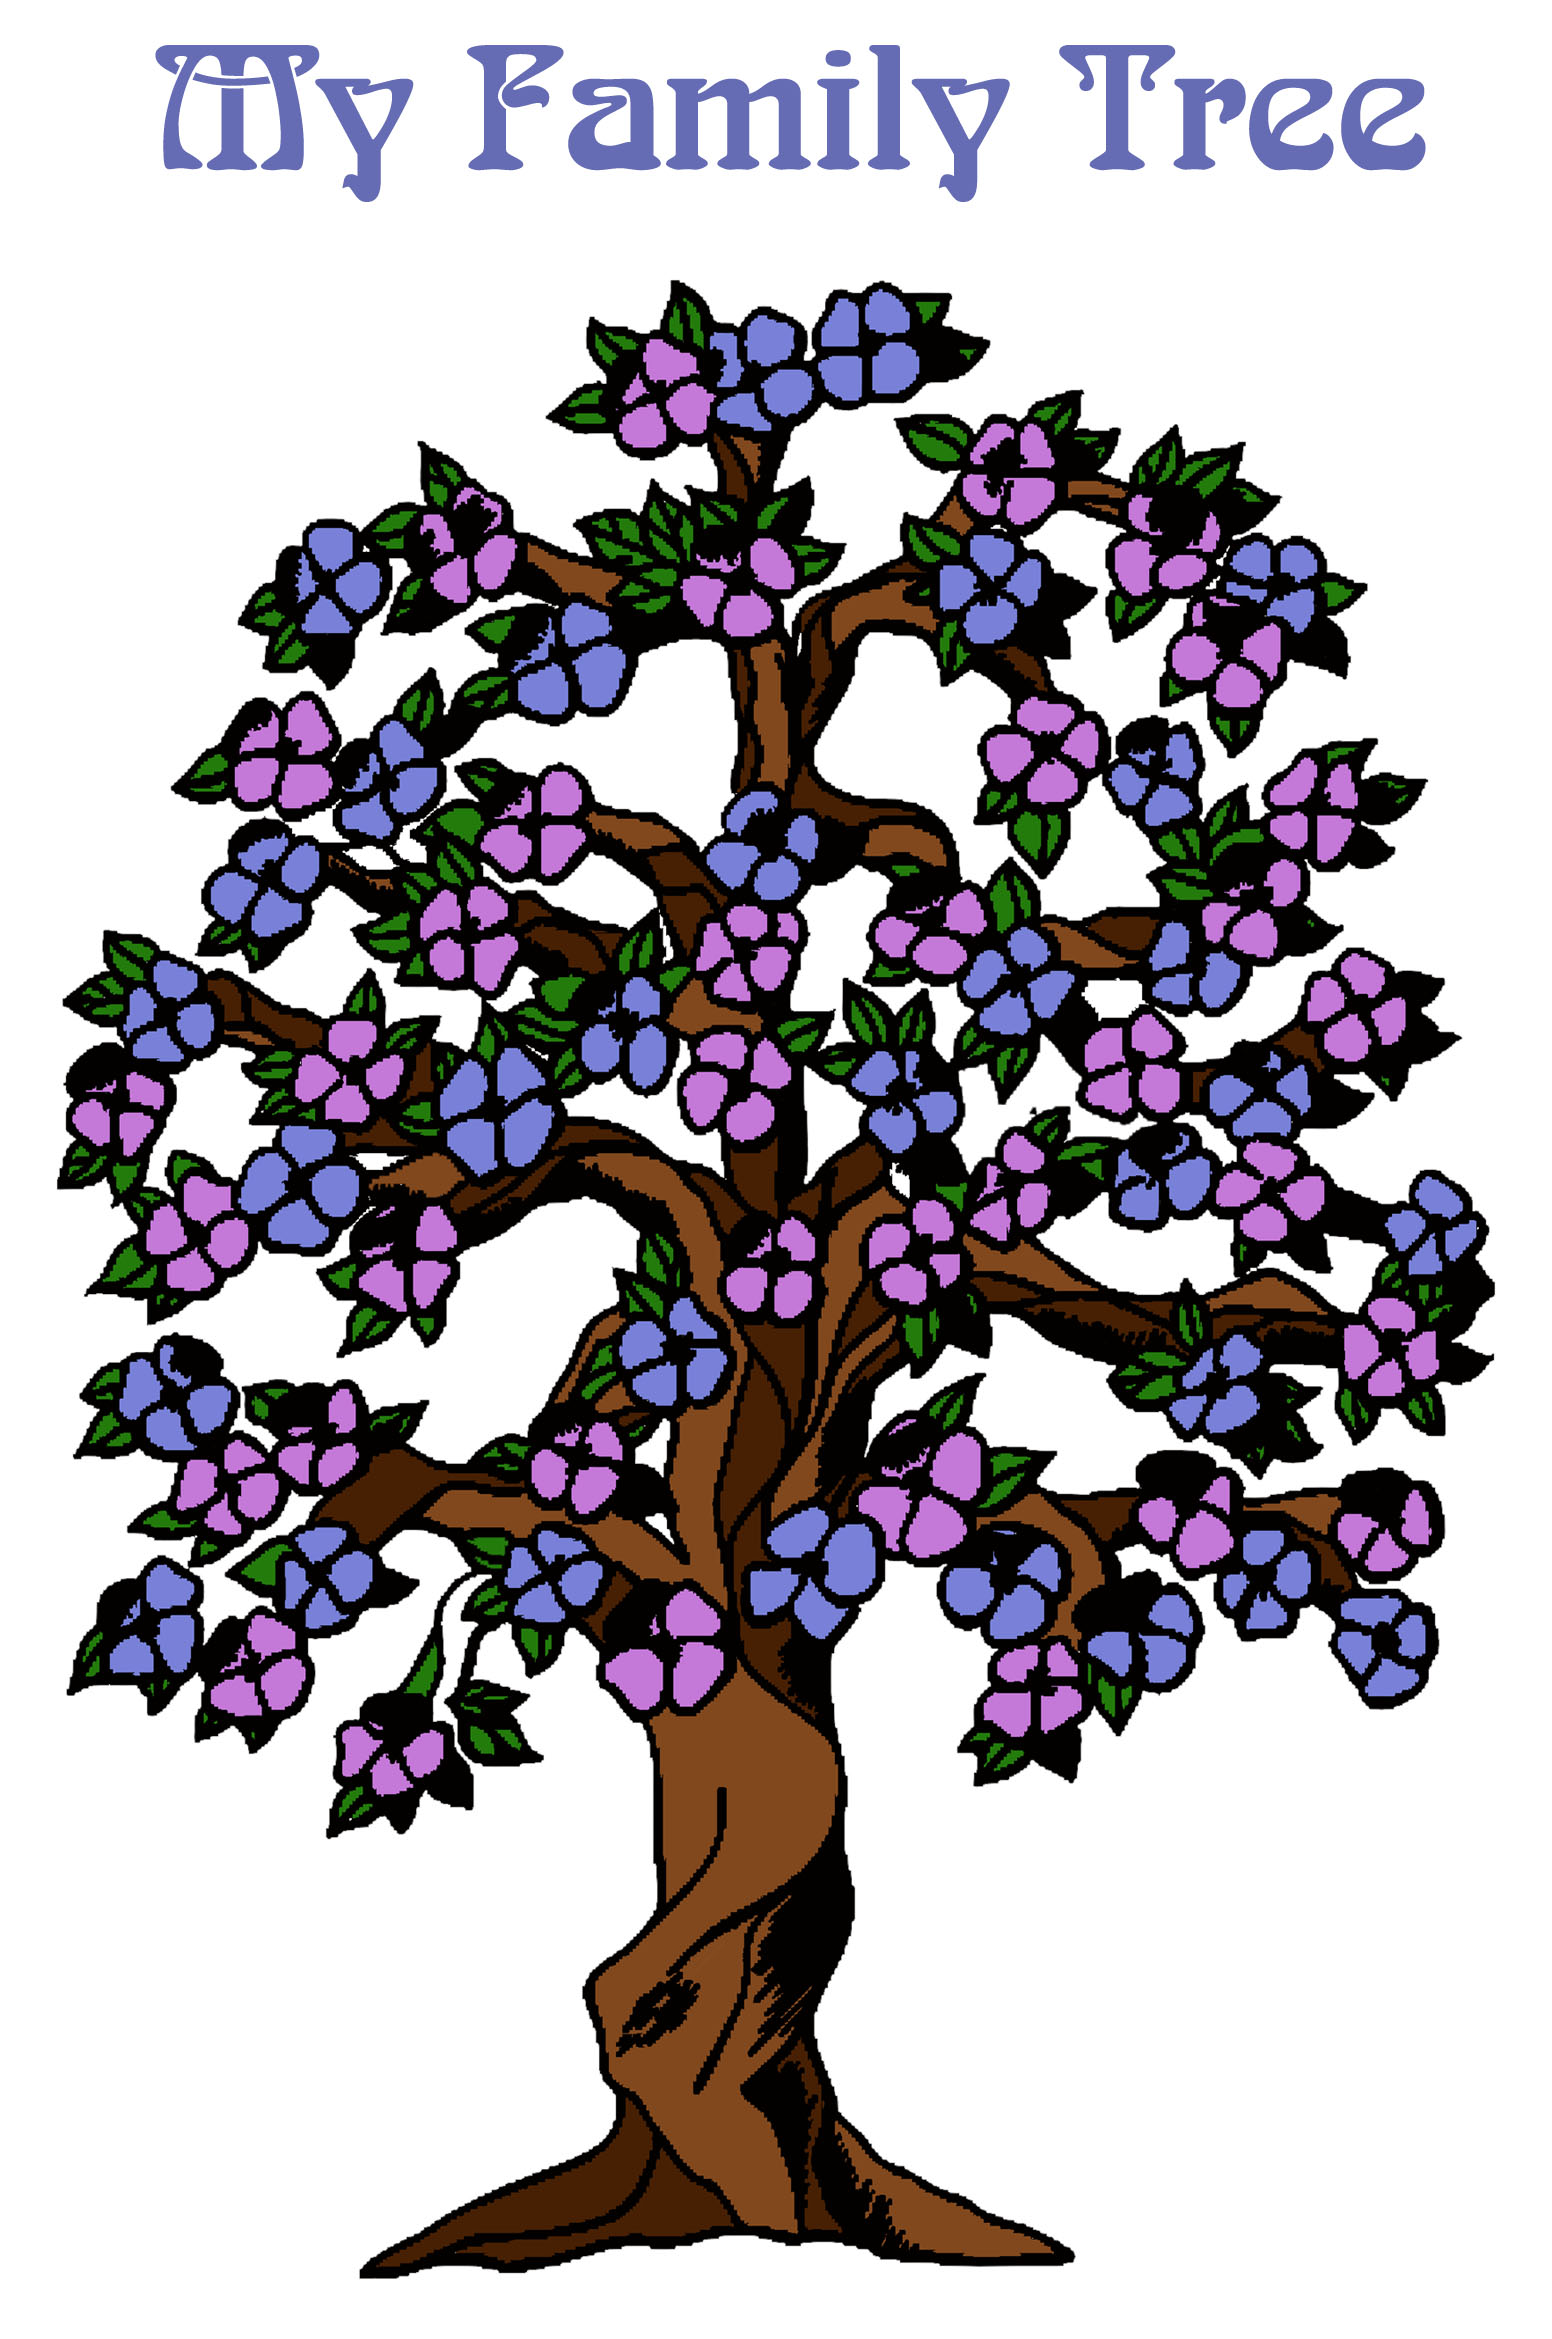 Family tree design for kids with colorful flowers.